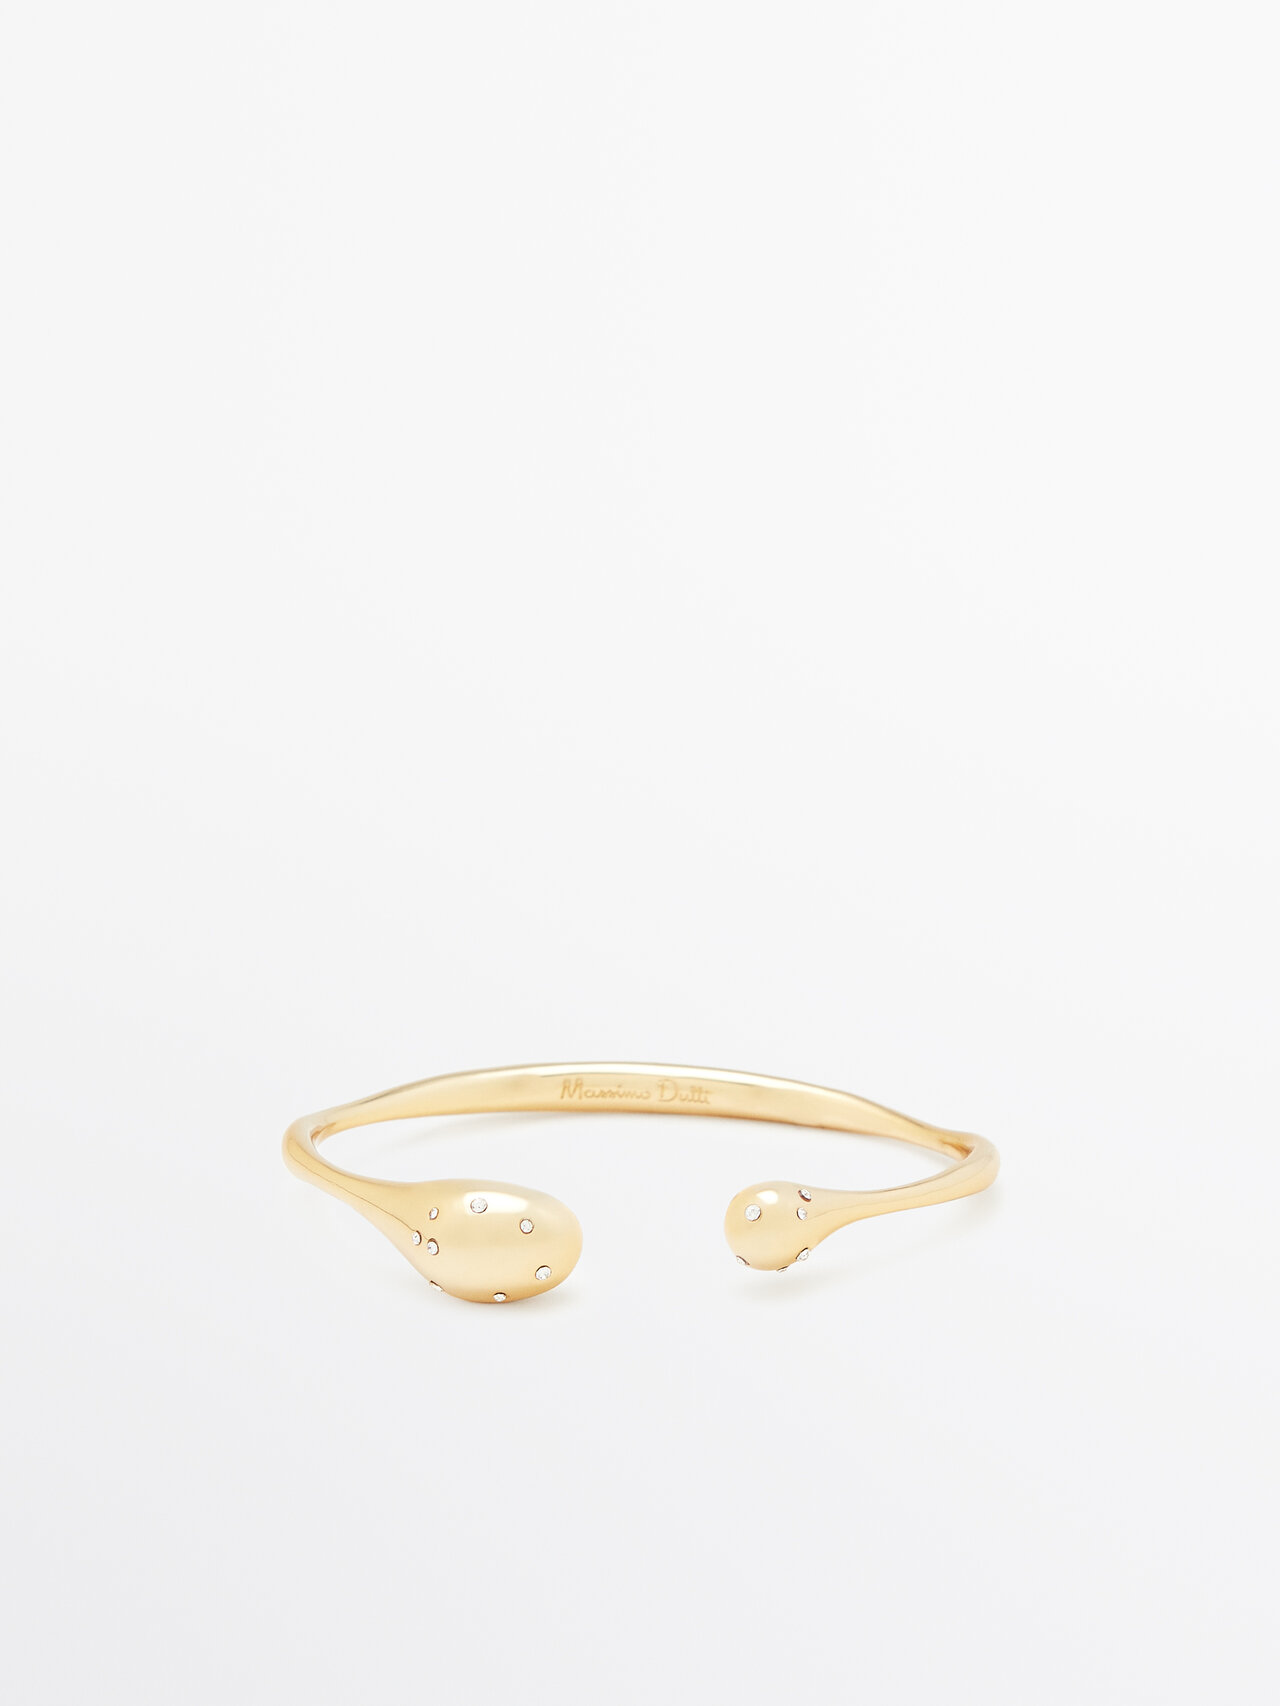 Massimo Dutti Rigid Bracelet With Rhinestone-encrusted Droplets In Golden